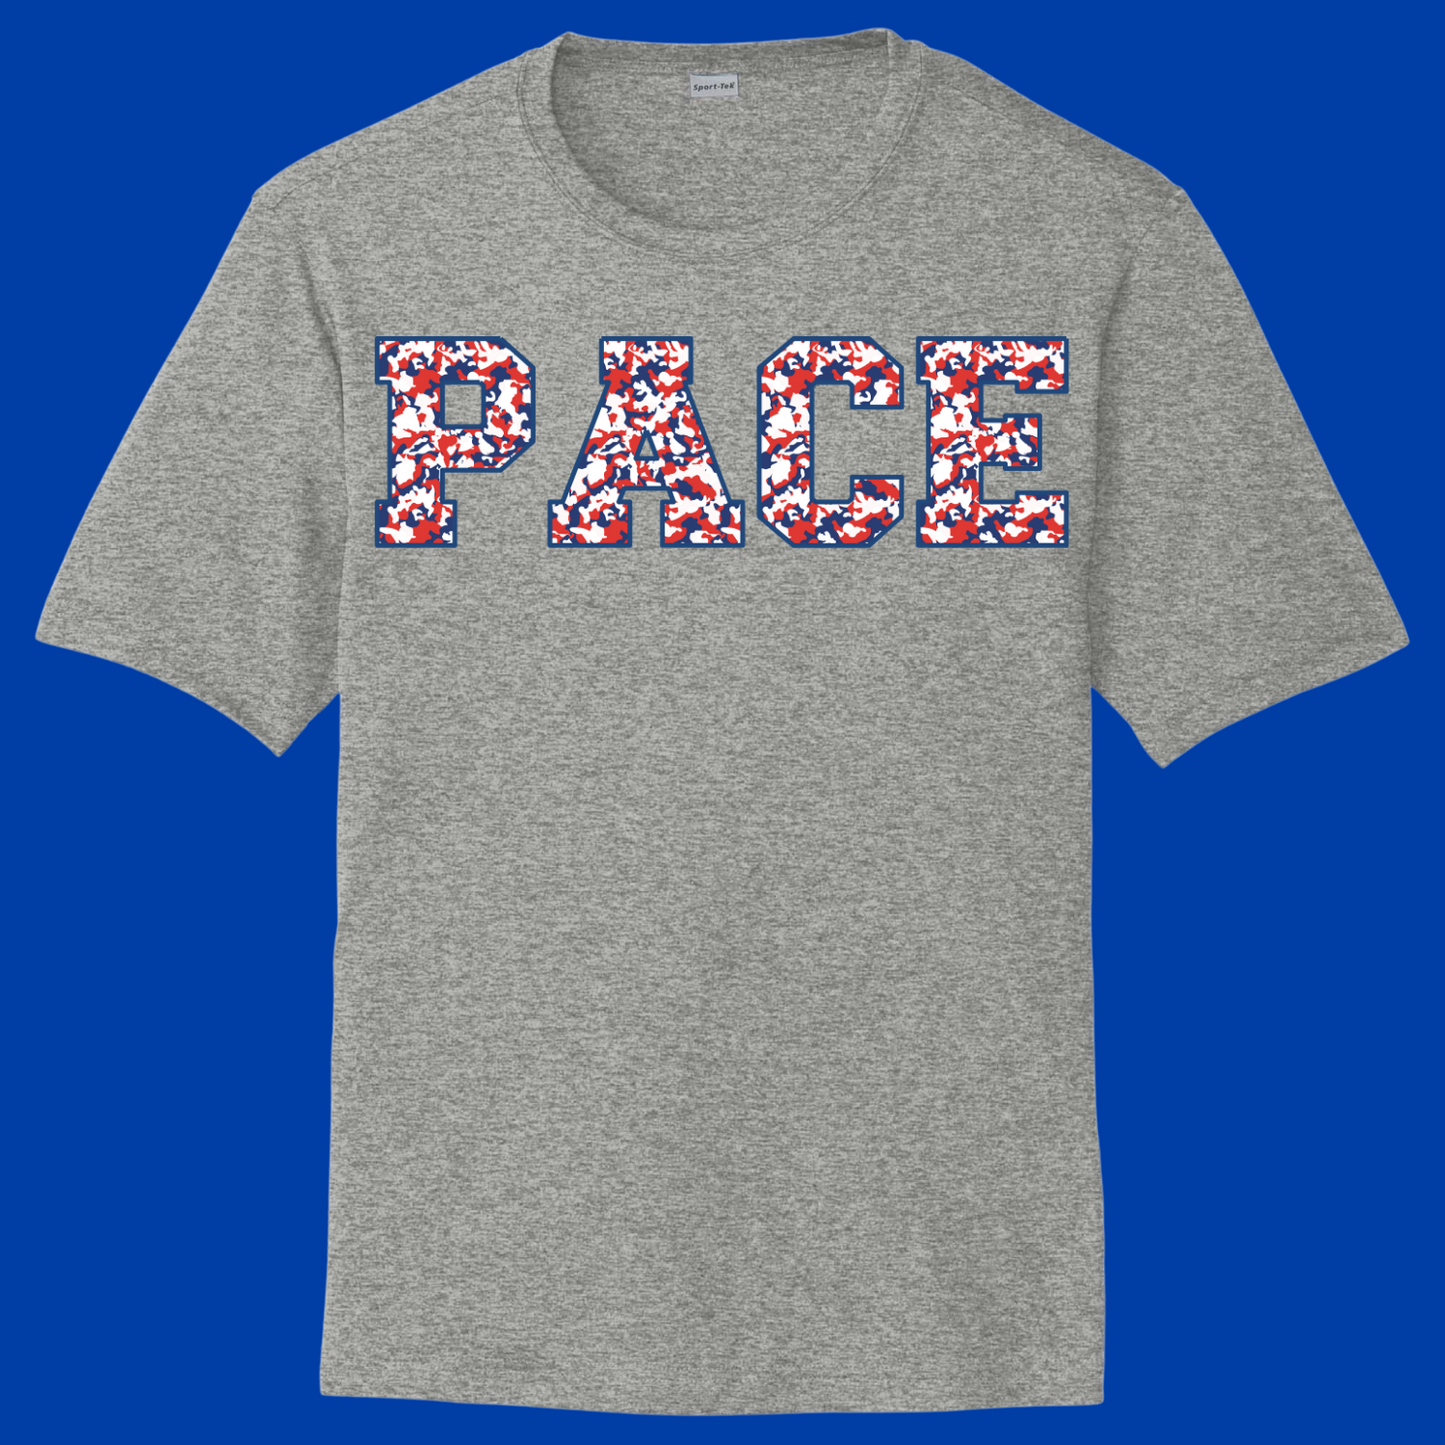 Pace Red + White + Blue Camo Dri-Wick Tee Youth